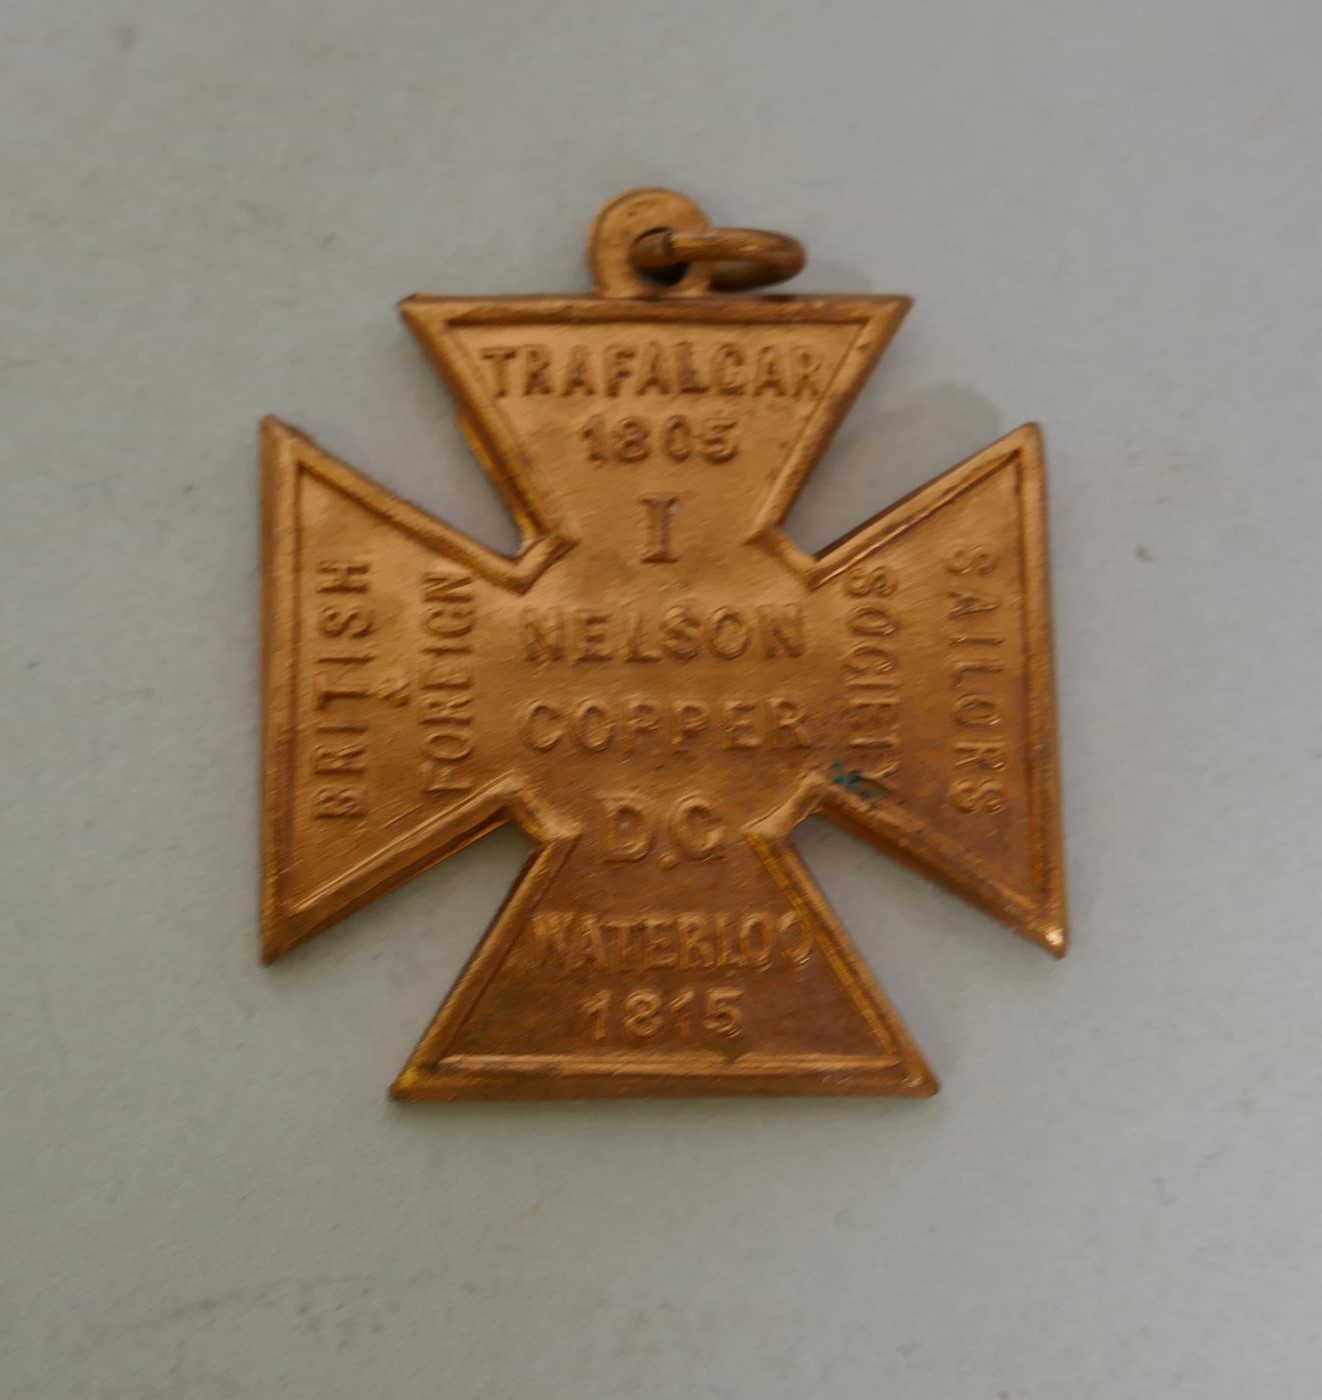 Admiral Lord Nelson memorabilia, a souvenir medal from the British and Foreign Sailor's Society, - Image 2 of 5